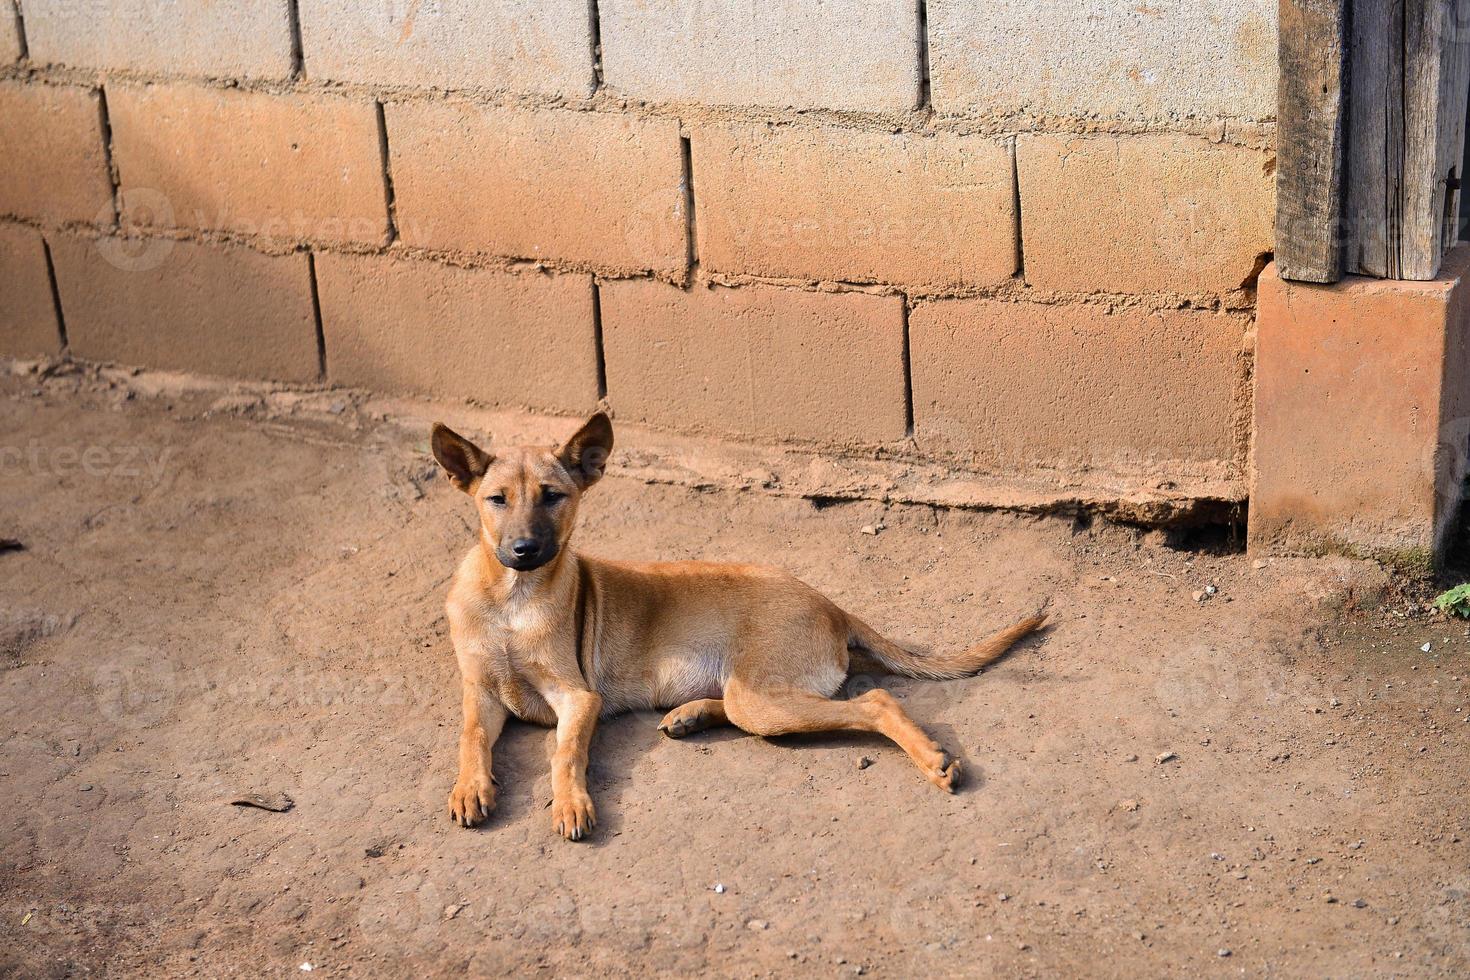 Abandoned, lonely dog in the rural area photo